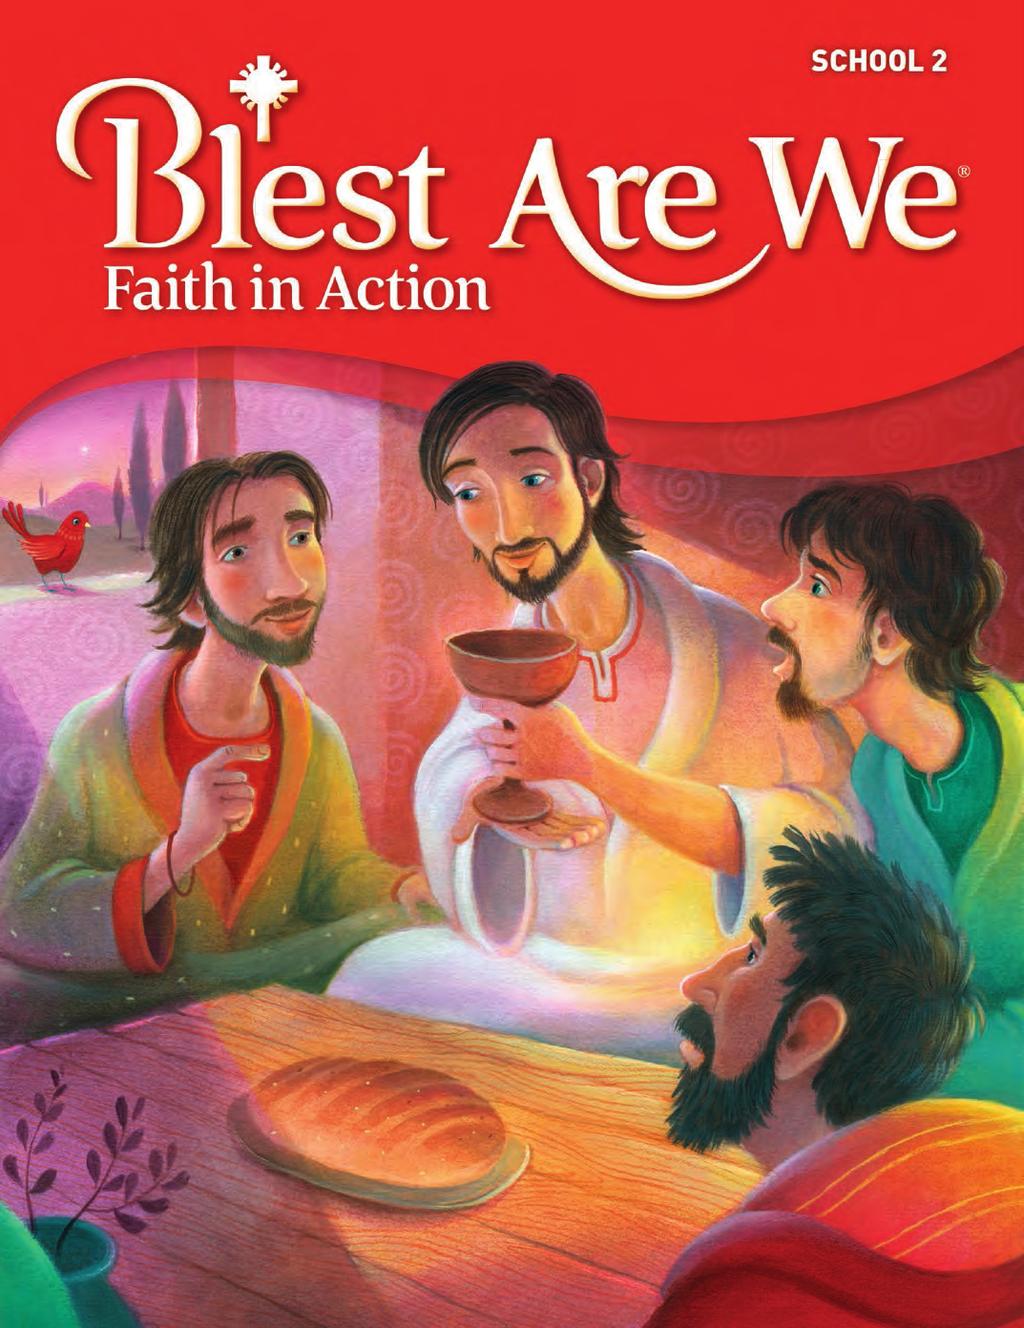 Grade 2 Student Edition Cover STUDENT EDITION COVER The Blest Are We Faith in Action logo honors the legacy of the series culminating in an understanding of Catholic